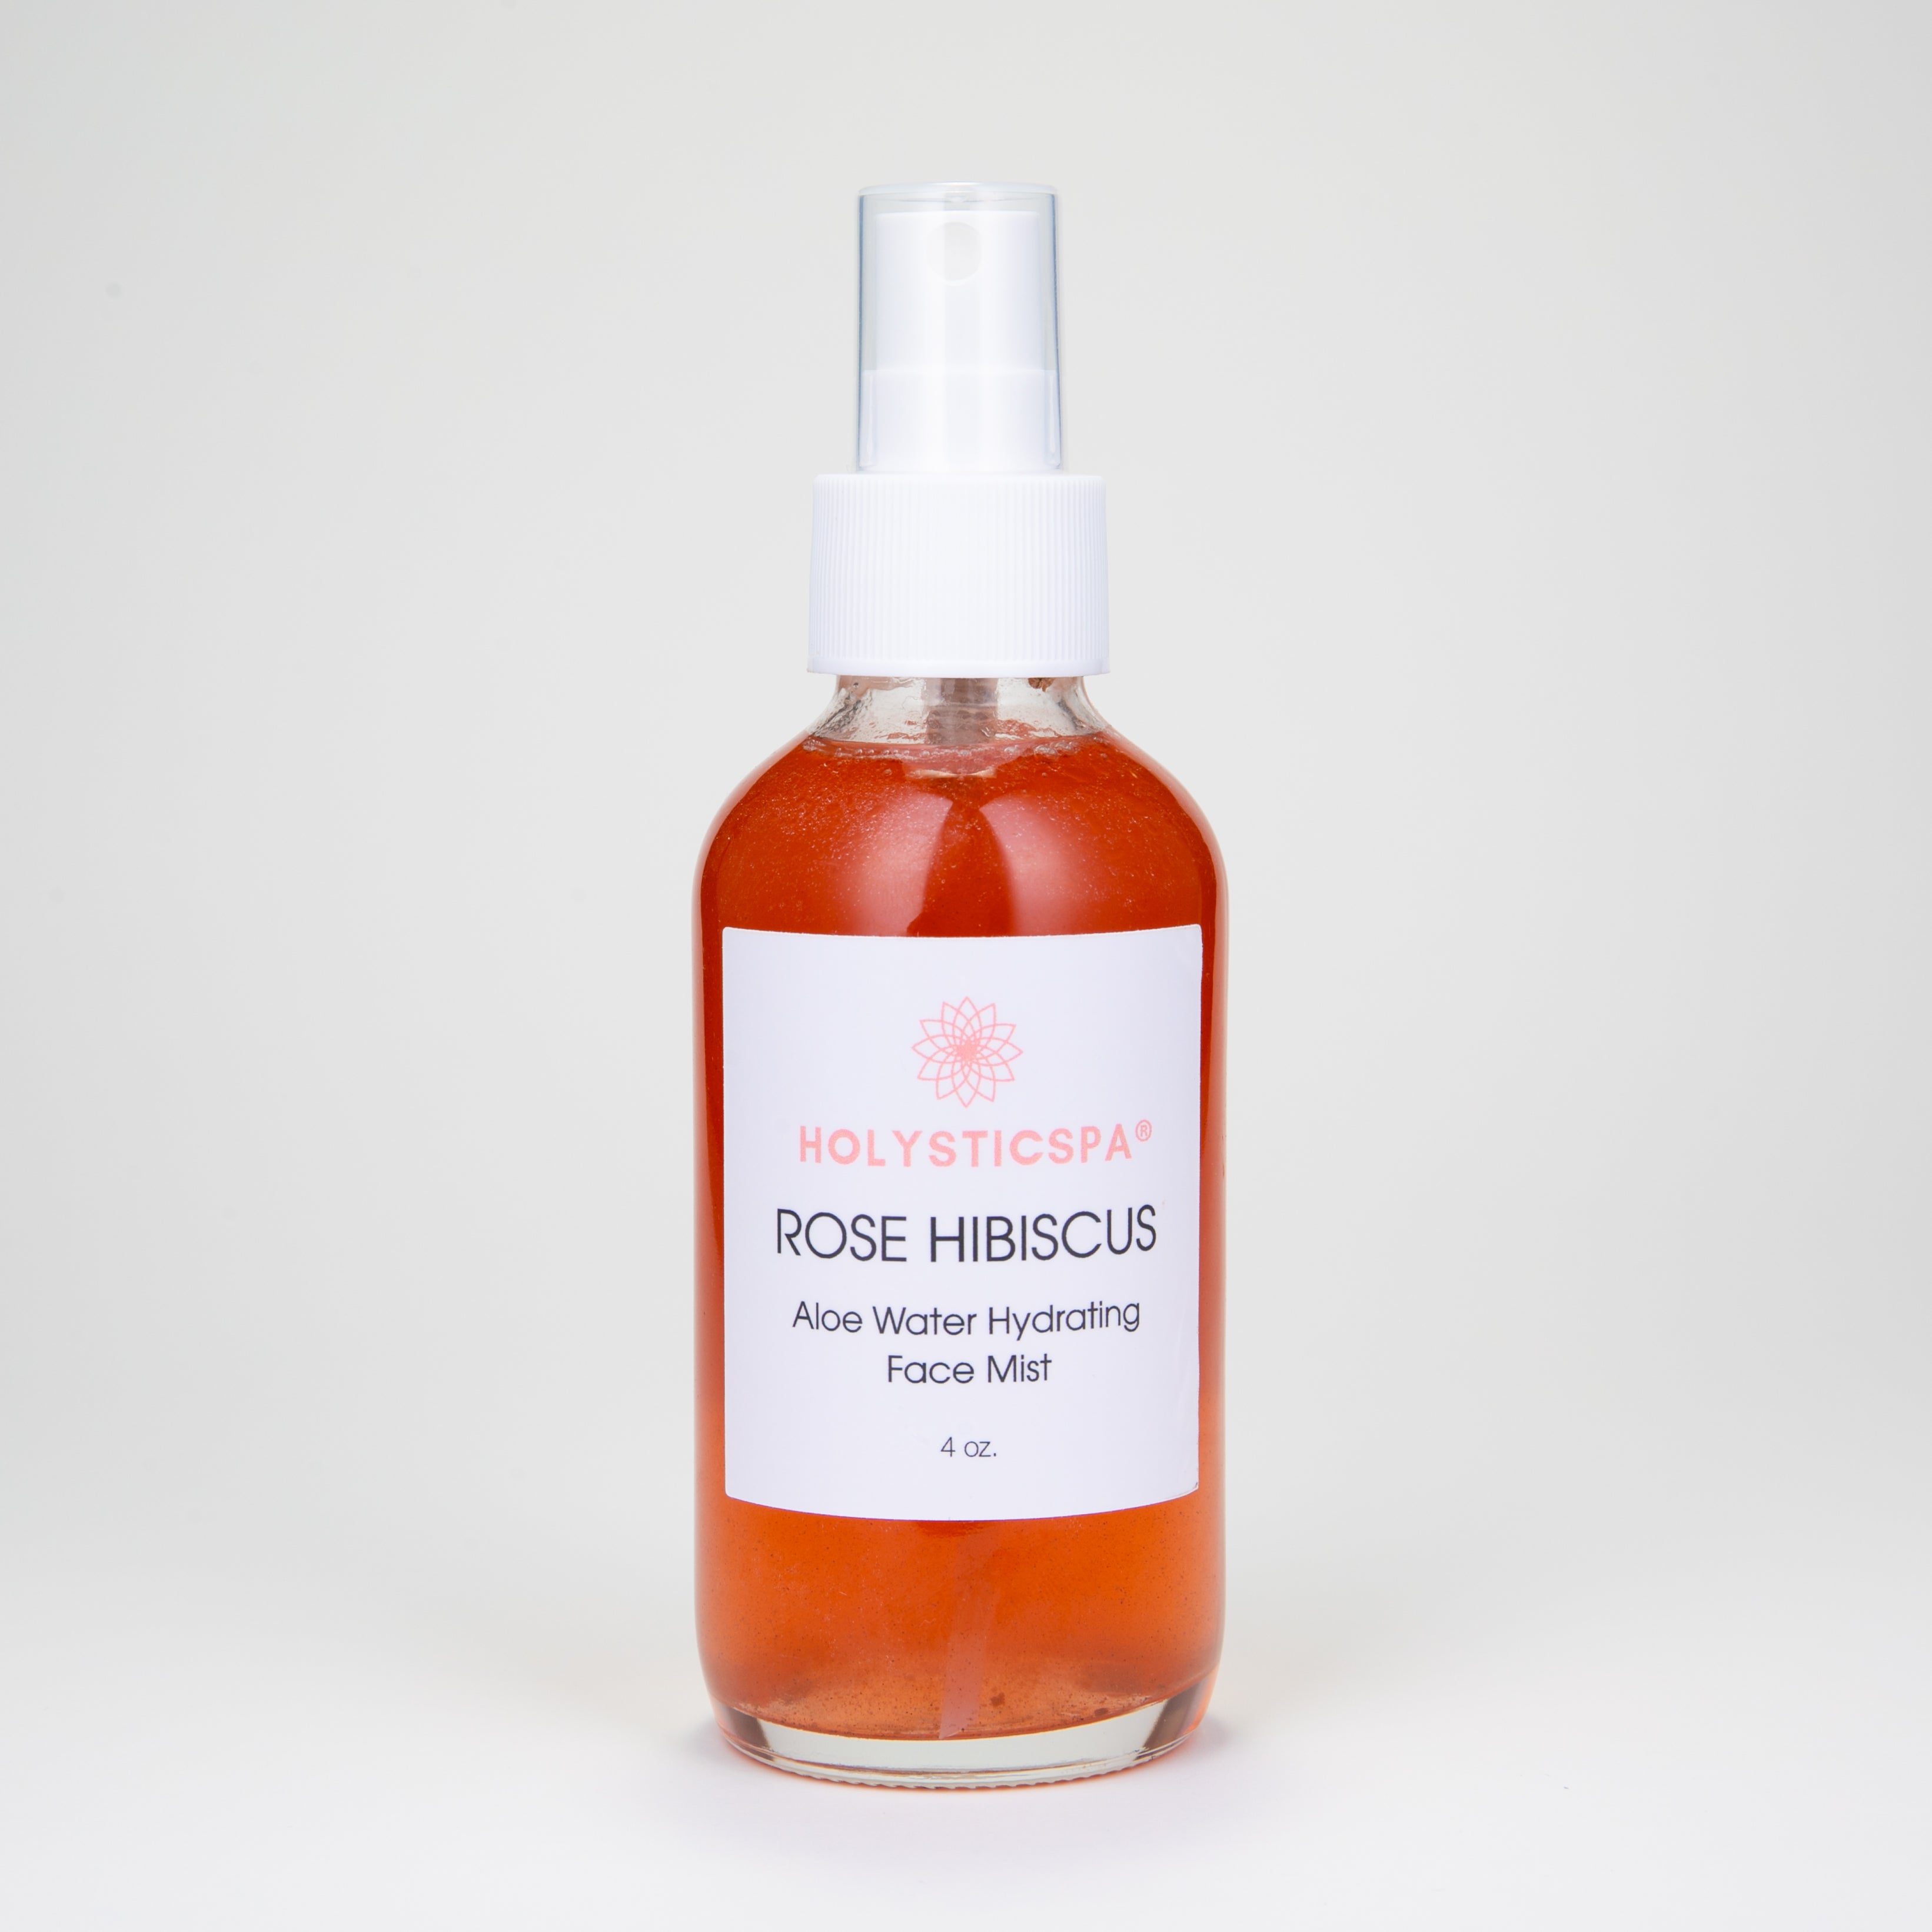 Rose Hibiscus Aloe Water Hydrating Face Mist